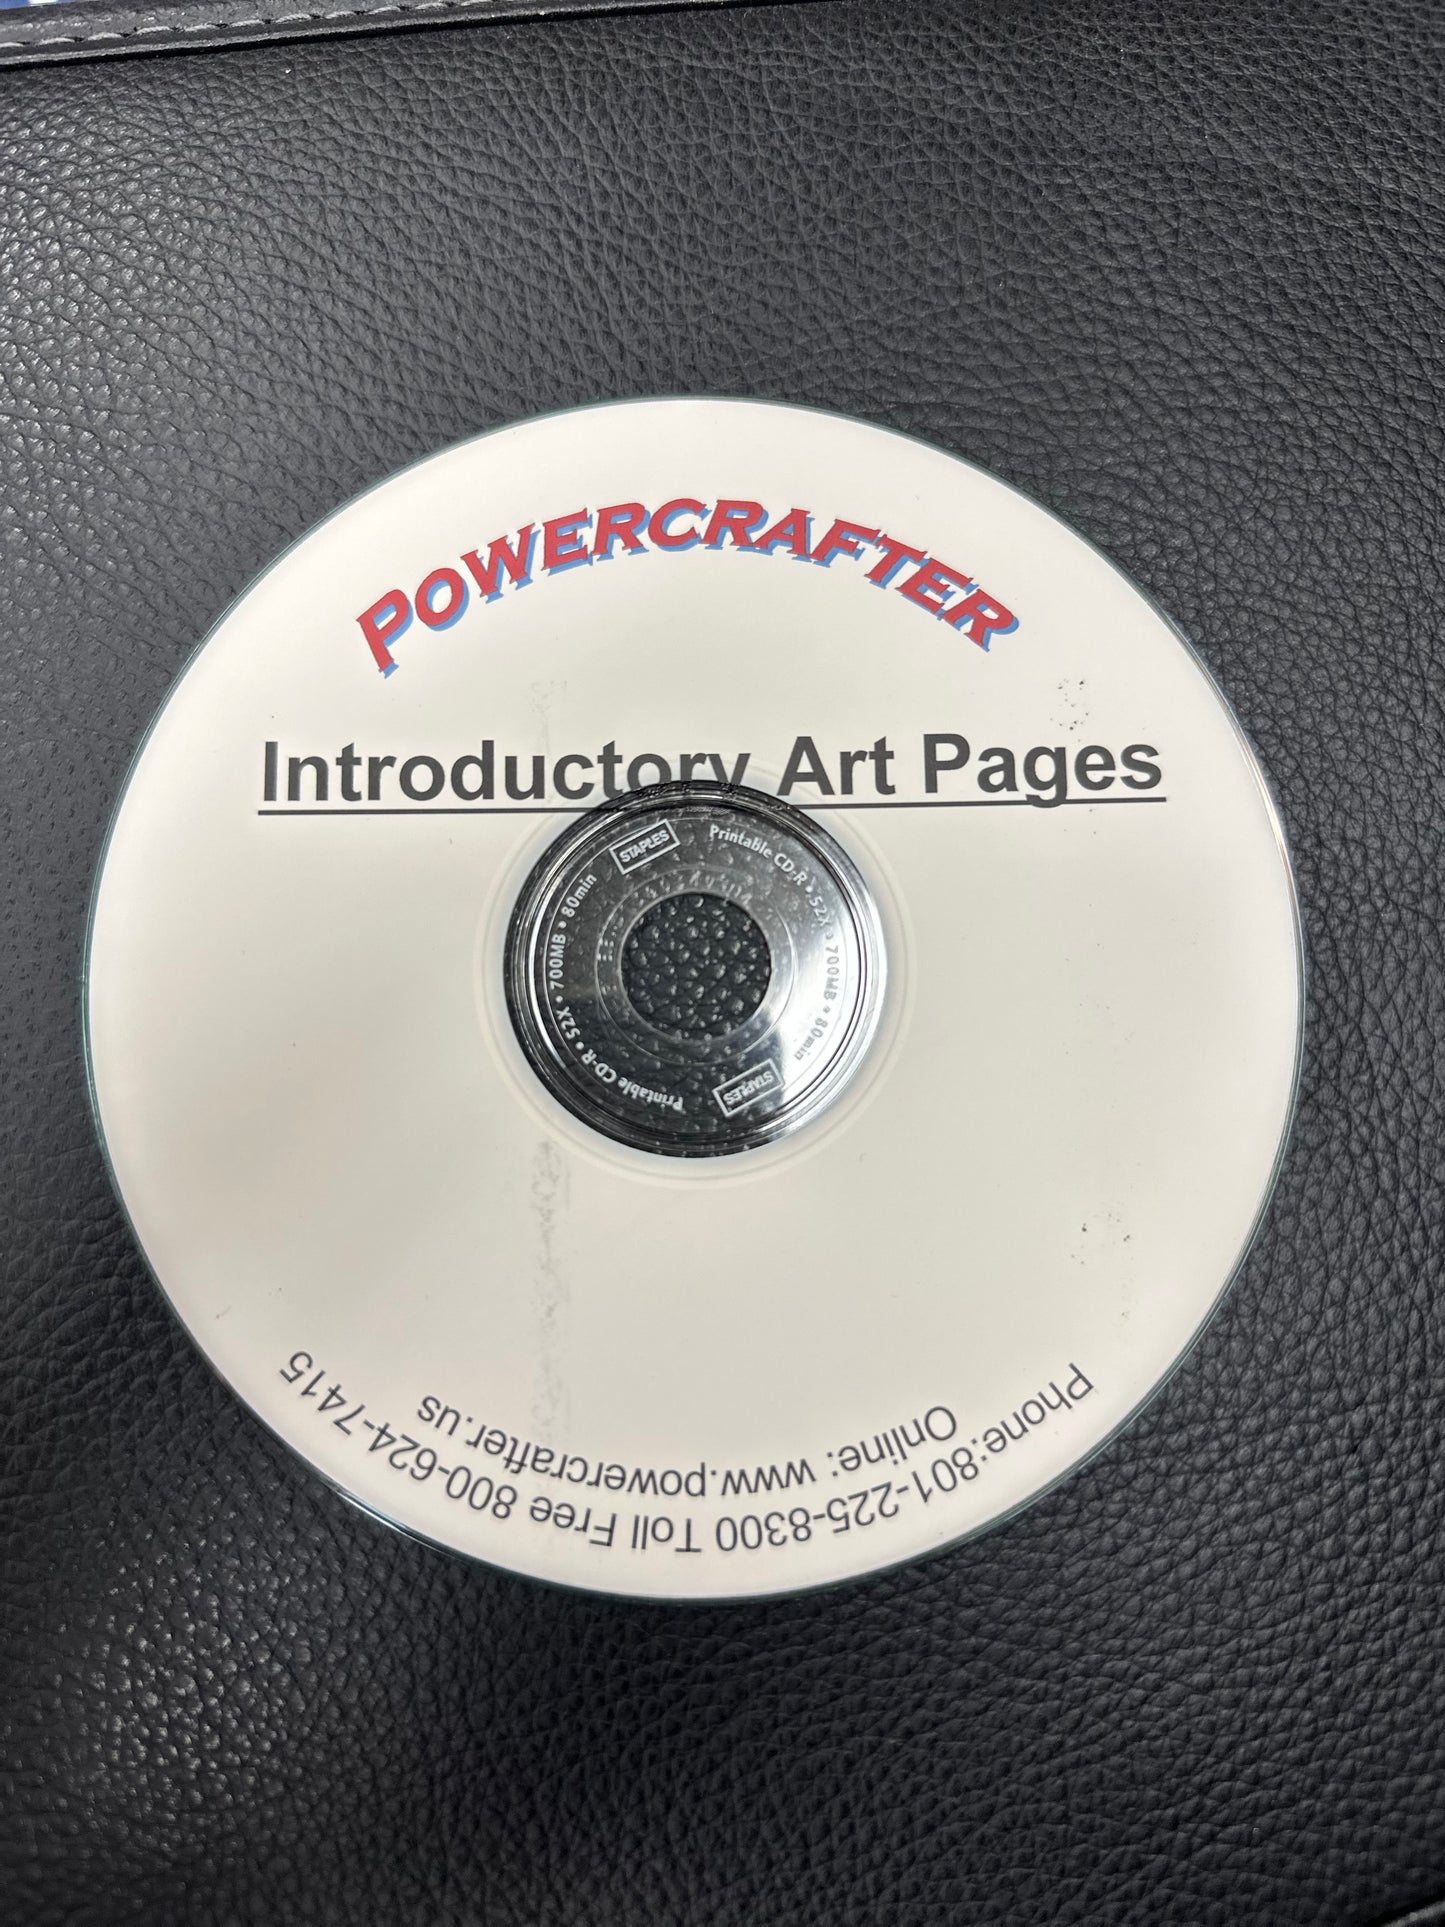 Introductory Artwork CD-Rom